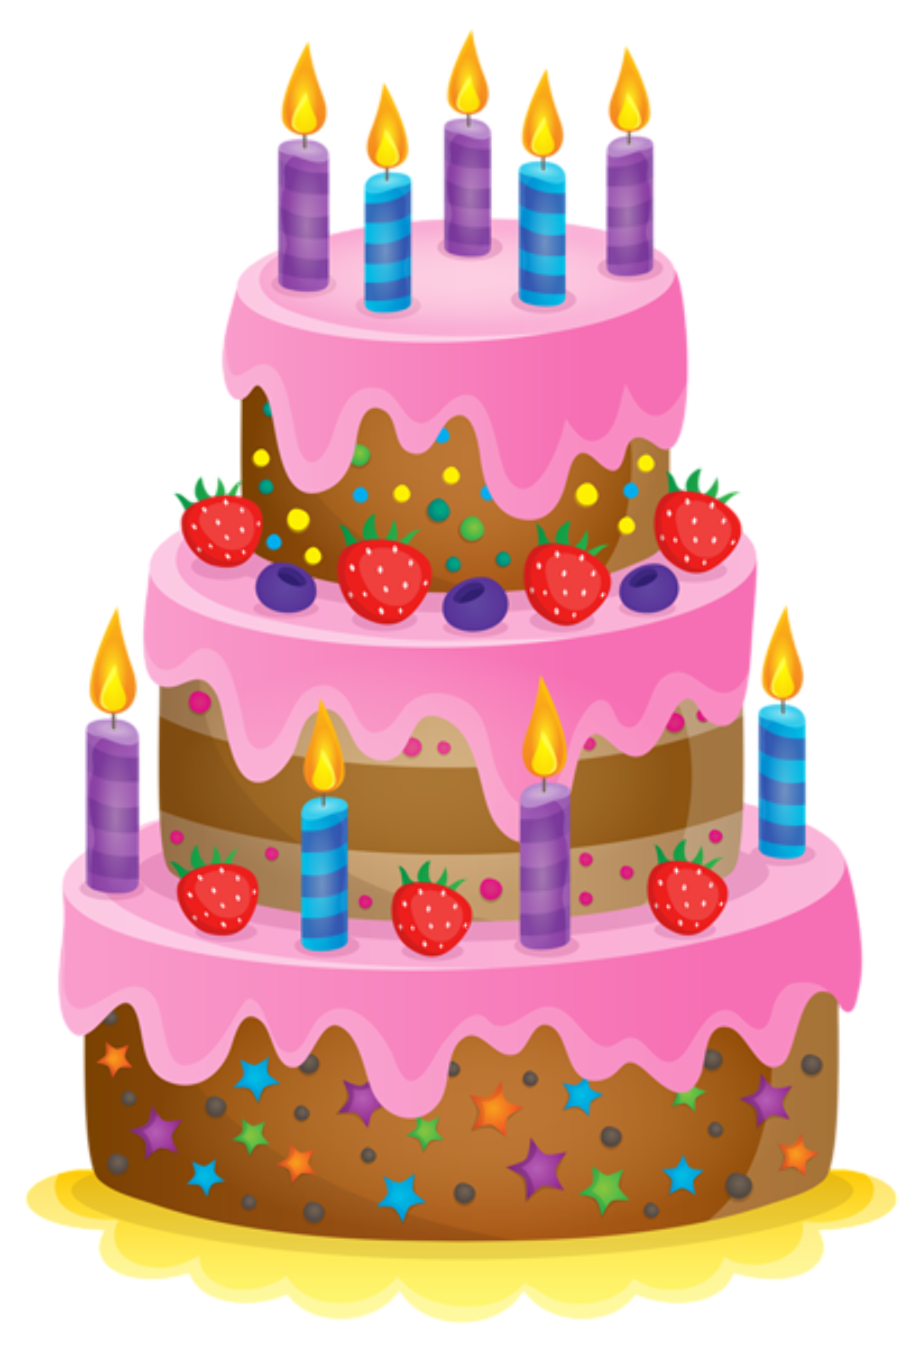 birthday-cake-clipart-png-birthday-cake-png-the-art-of-images